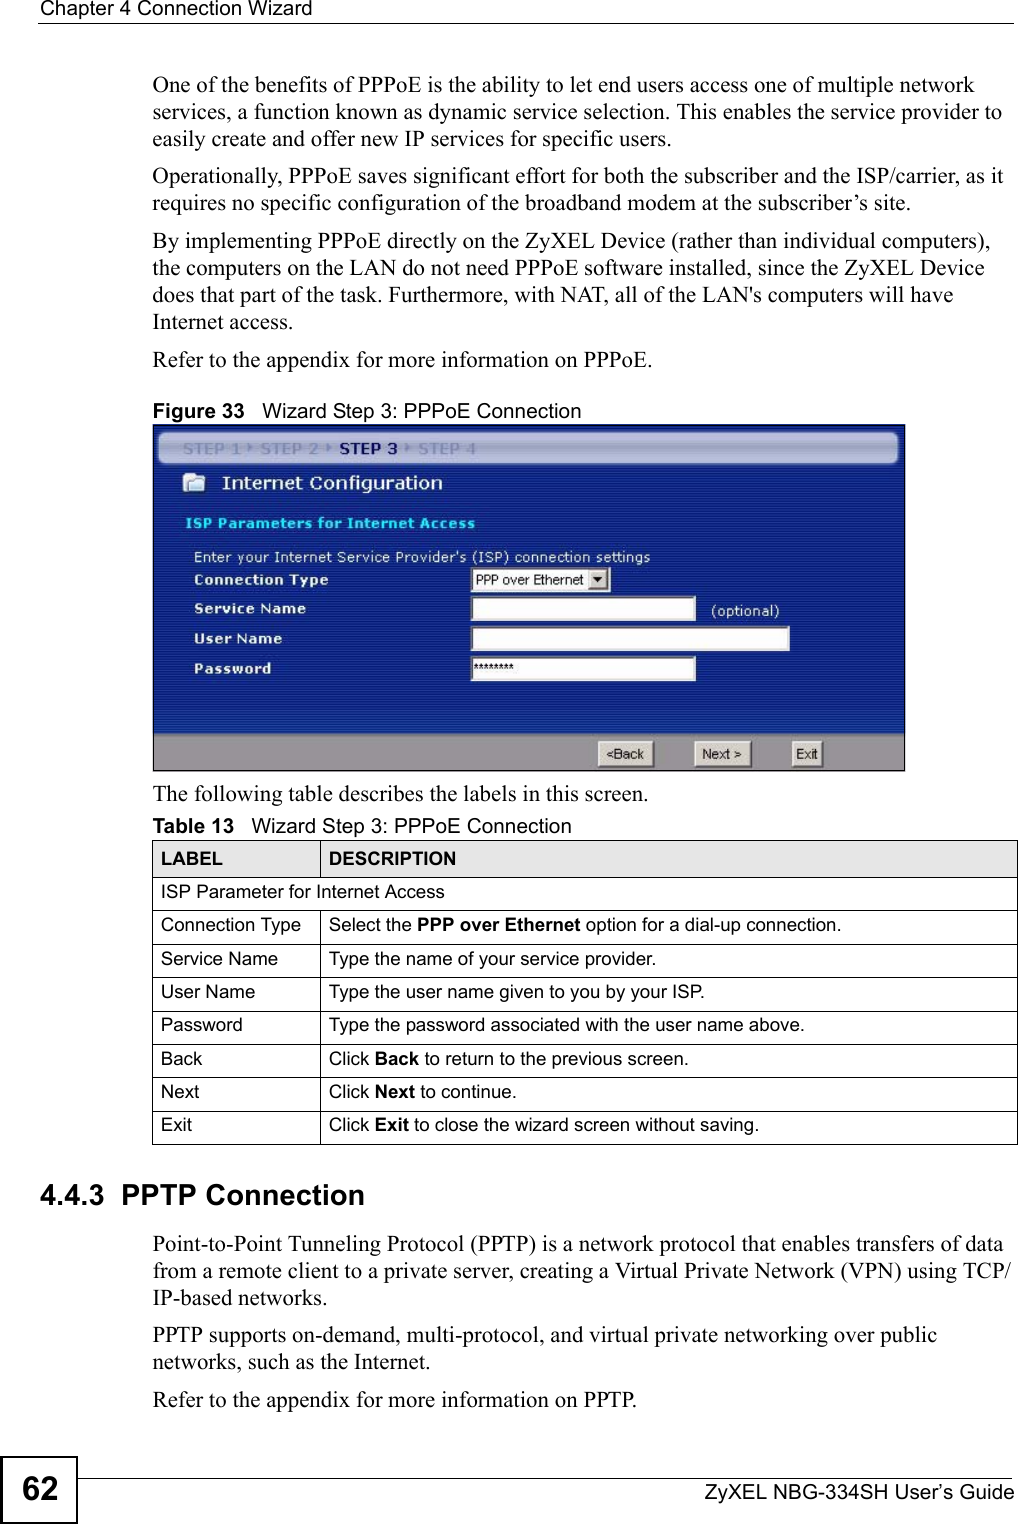 Chapter 4 Connection WizardZyXEL NBG-334SH User’s Guide62One of the benefits of PPPoE is the ability to let end users access one of multiple network services, a function known as dynamic service selection. This enables the service provider to easily create and offer new IP services for specific users.Operationally, PPPoE saves significant effort for both the subscriber and the ISP/carrier, as it requires no specific configuration of the broadband modem at the subscriber’s site.By implementing PPPoE directly on the ZyXEL Device (rather than individual computers), the computers on the LAN do not need PPPoE software installed, since the ZyXEL Device does that part of the task. Furthermore, with NAT, all of the LAN&apos;s computers will have Internet access.Refer to the appendix for more information on PPPoE.Figure 33   Wizard Step 3: PPPoE ConnectionThe following table describes the labels in this screen.4.4.3  PPTP ConnectionPoint-to-Point Tunneling Protocol (PPTP) is a network protocol that enables transfers of data from a remote client to a private server, creating a Virtual Private Network (VPN) using TCP/IP-based networks.PPTP supports on-demand, multi-protocol, and virtual private networking over public networks, such as the Internet.Refer to the appendix for more information on PPTP.Table 13   Wizard Step 3: PPPoE ConnectionLABEL DESCRIPTIONISP Parameter for Internet AccessConnection Type Select the PPP over Ethernet option for a dial-up connection.Service Name  Type the name of your service provider.User Name Type the user name given to you by your ISP. Password  Type the password associated with the user name above.Back Click Back to return to the previous screen. Next Click Next to continue. Exit Click Exit to close the wizard screen without saving.